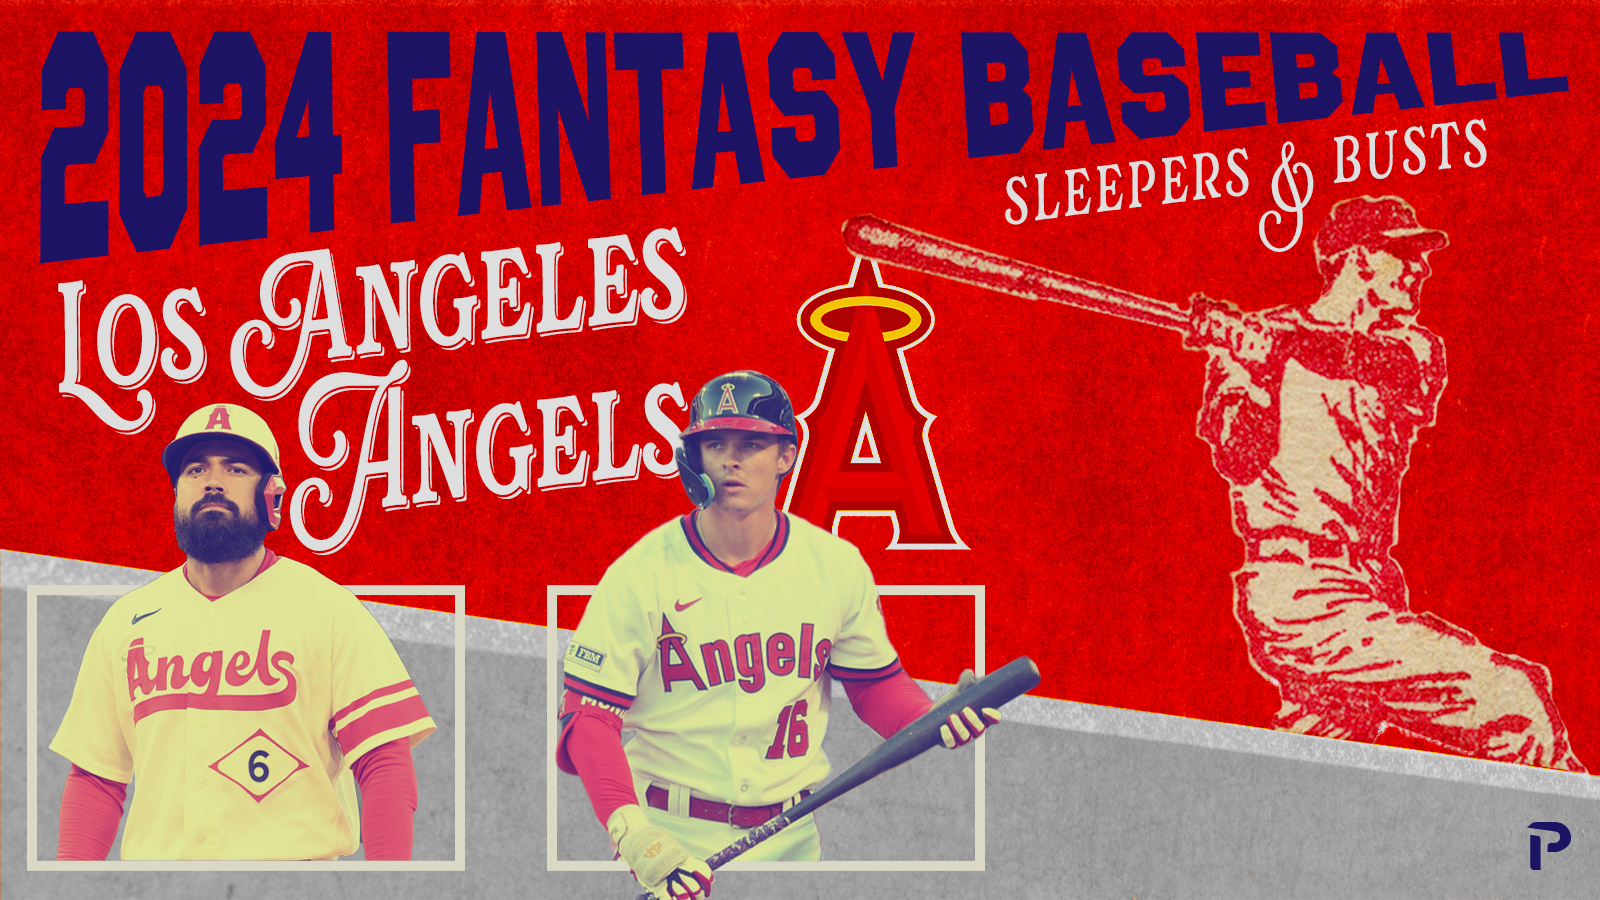 2024 Fantasy Baseball Sleepers & Busts Los Angeles Angels Pitcher List